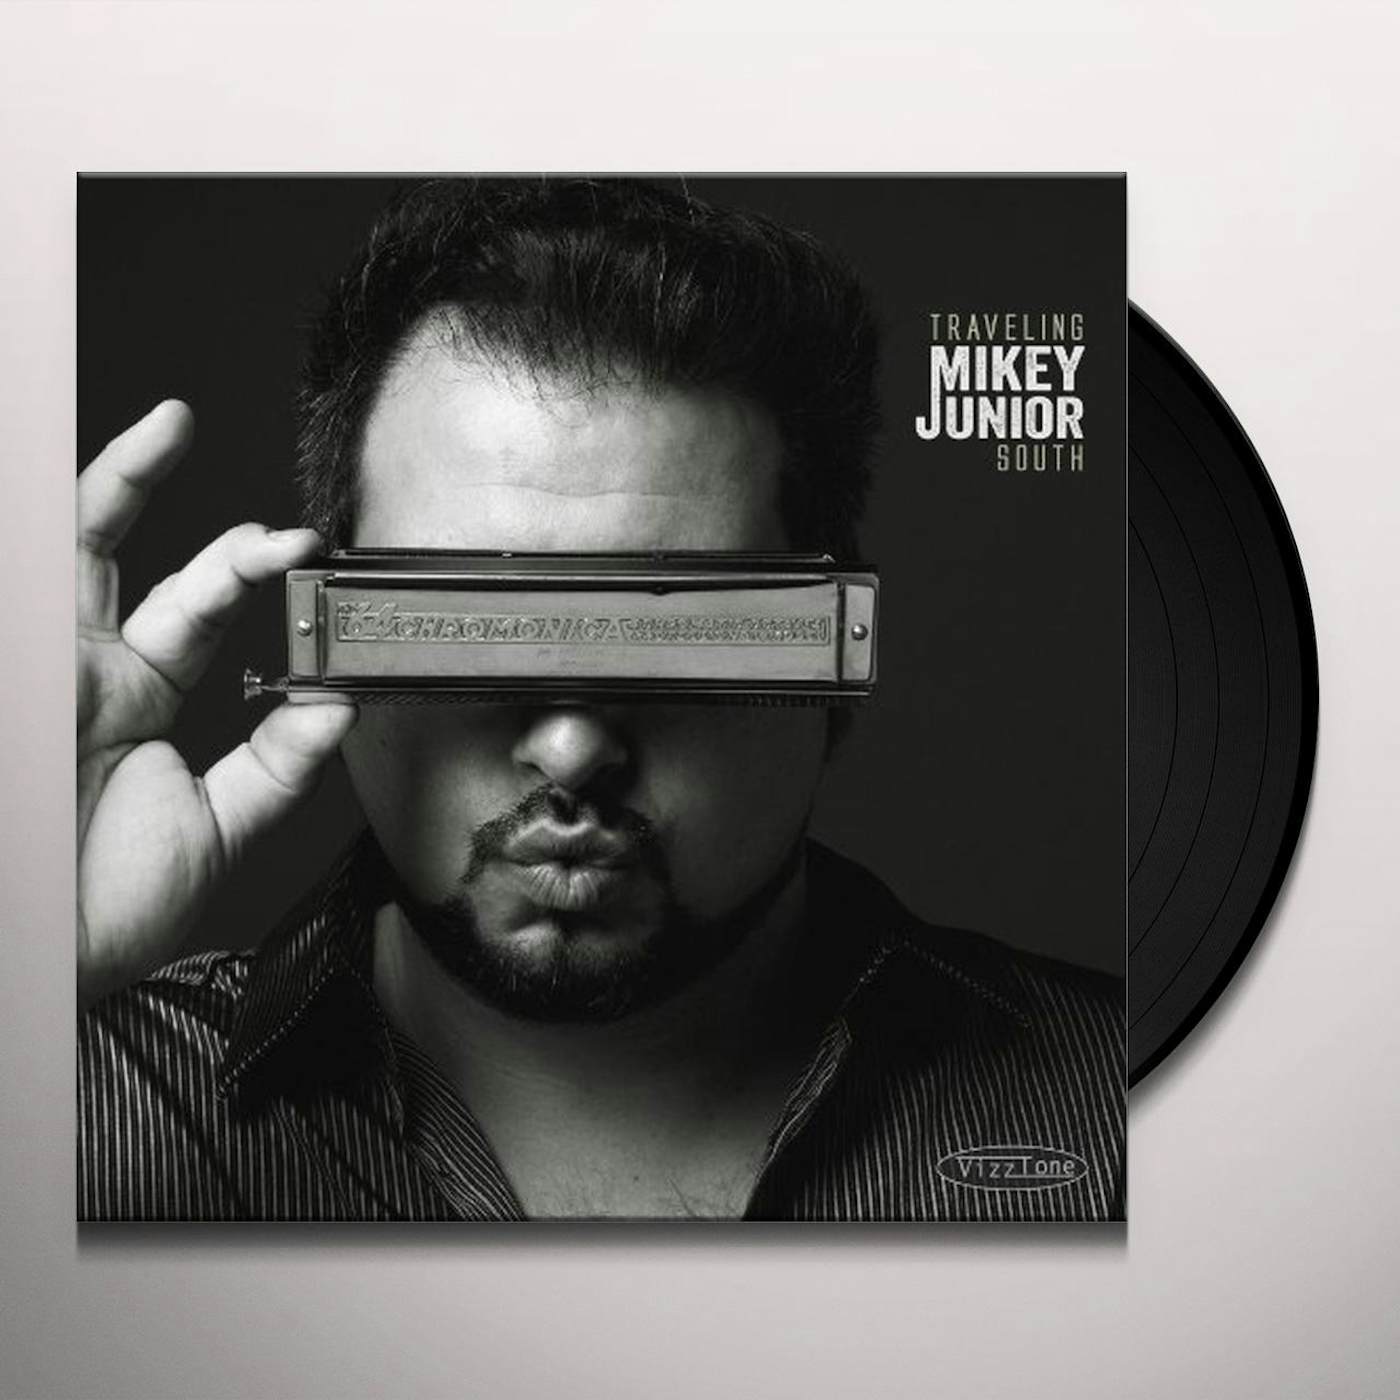 Mikey Junior Traveling South Vinyl Record